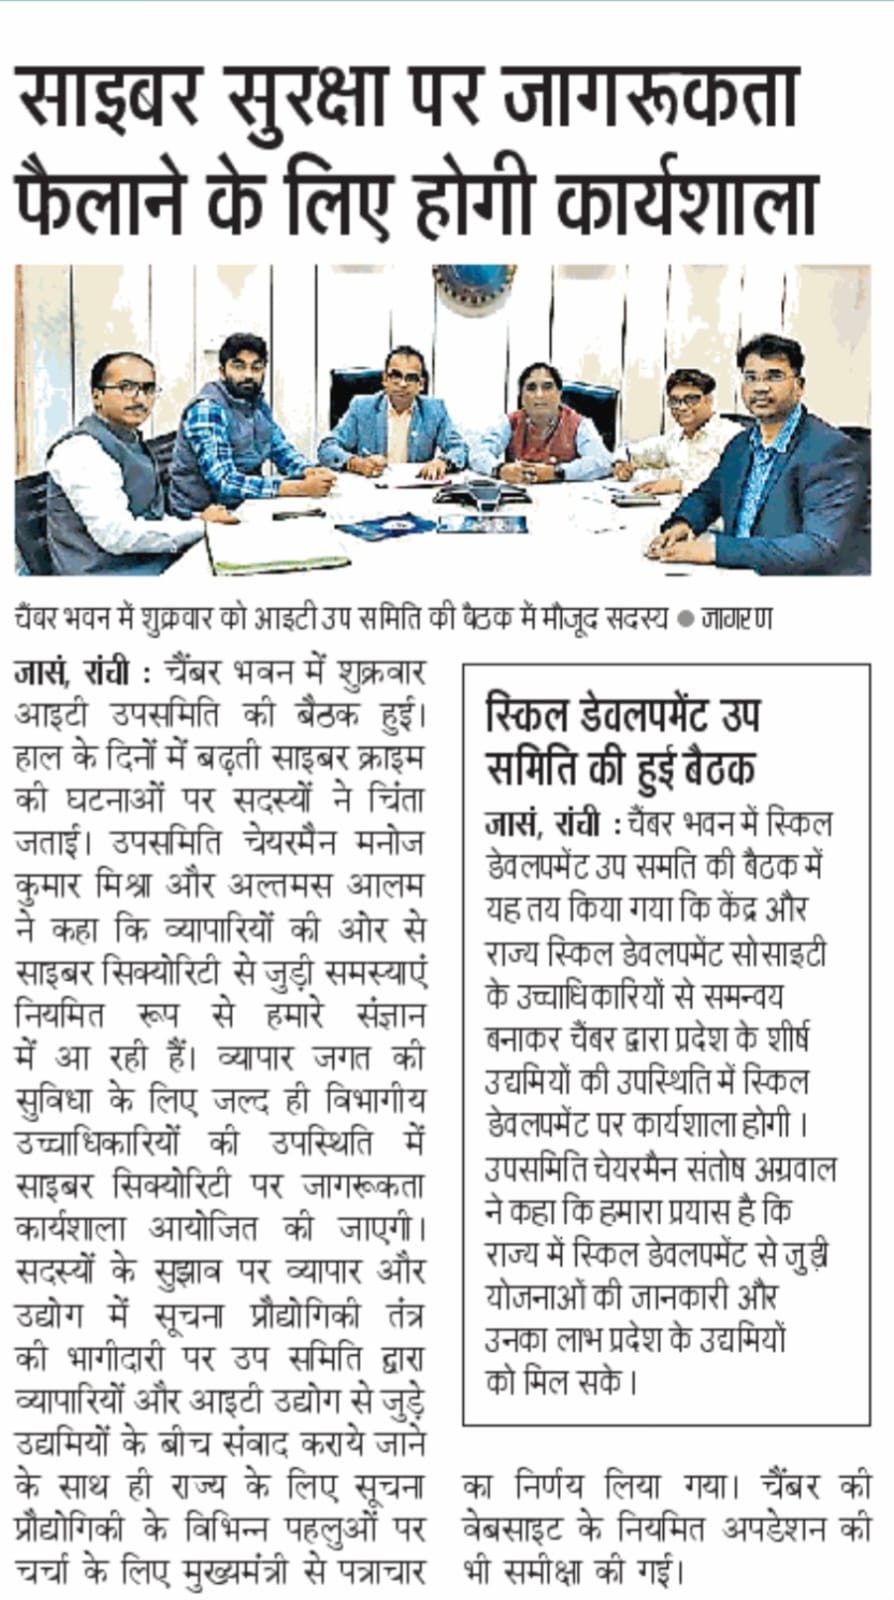 Meeting of i) IT Sub-Committee and ii) Skill Development Sub-Committee held at Chaber Bhawan.